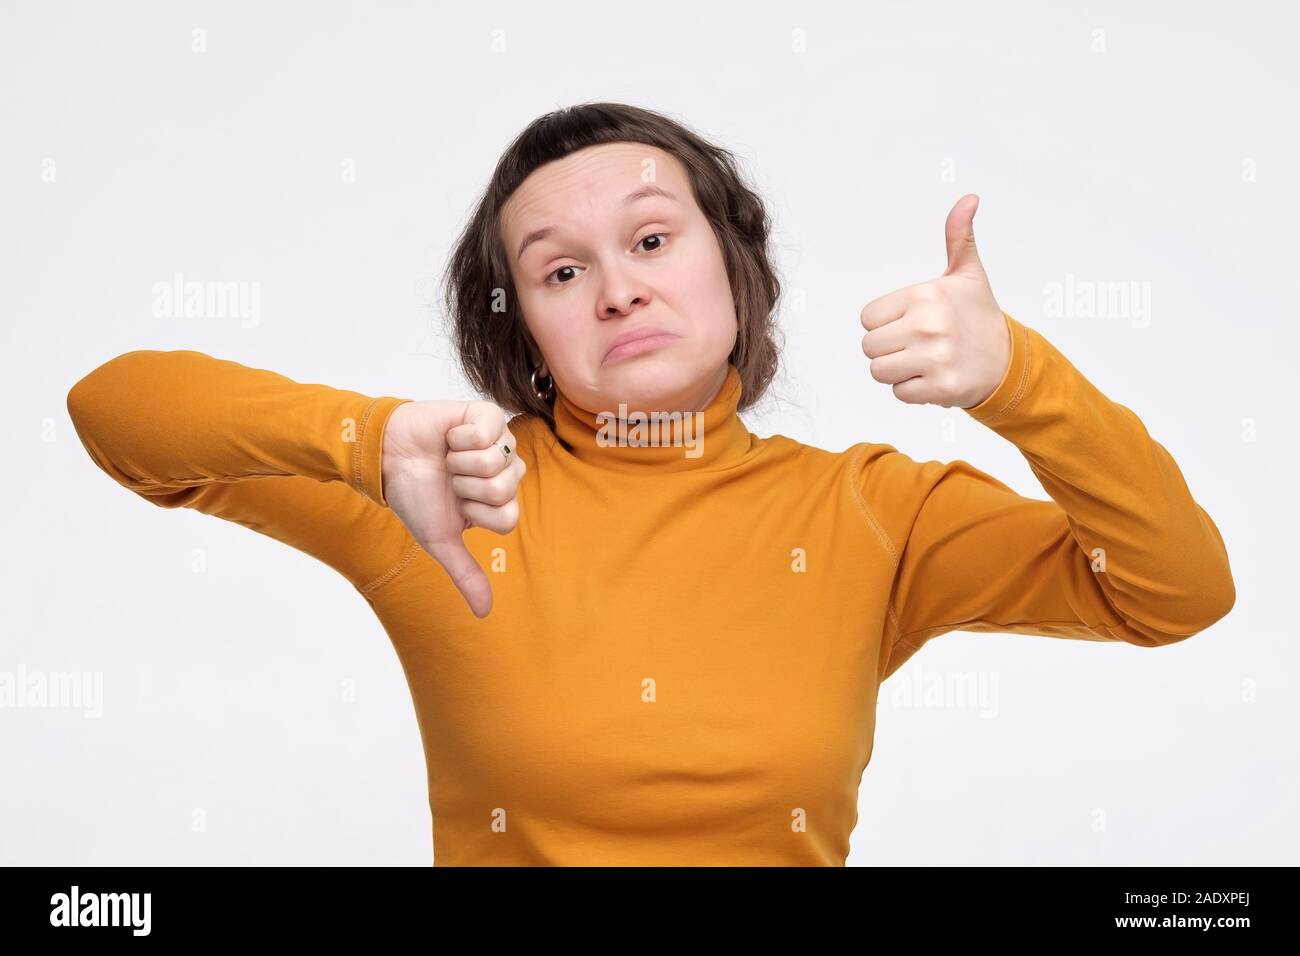 Pretty Young Girl Making Good Bad Sign Showing Thumb Up And Down. Studio  Shot Stock Photo - Alamy